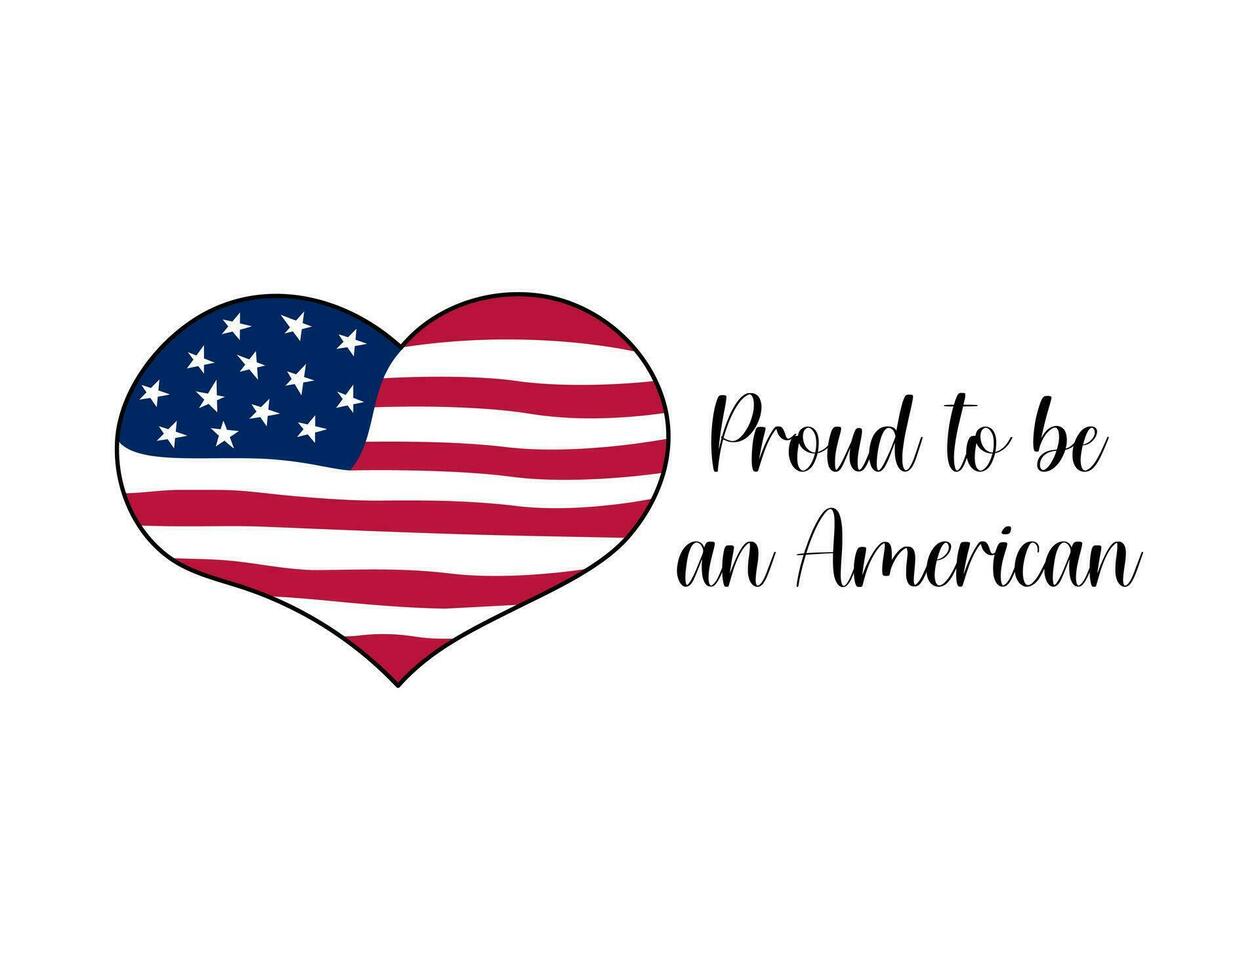 USA flag heart shape. Proud to be American text. Patriotic vector doodle illustration. Cute hand drawn style of flag